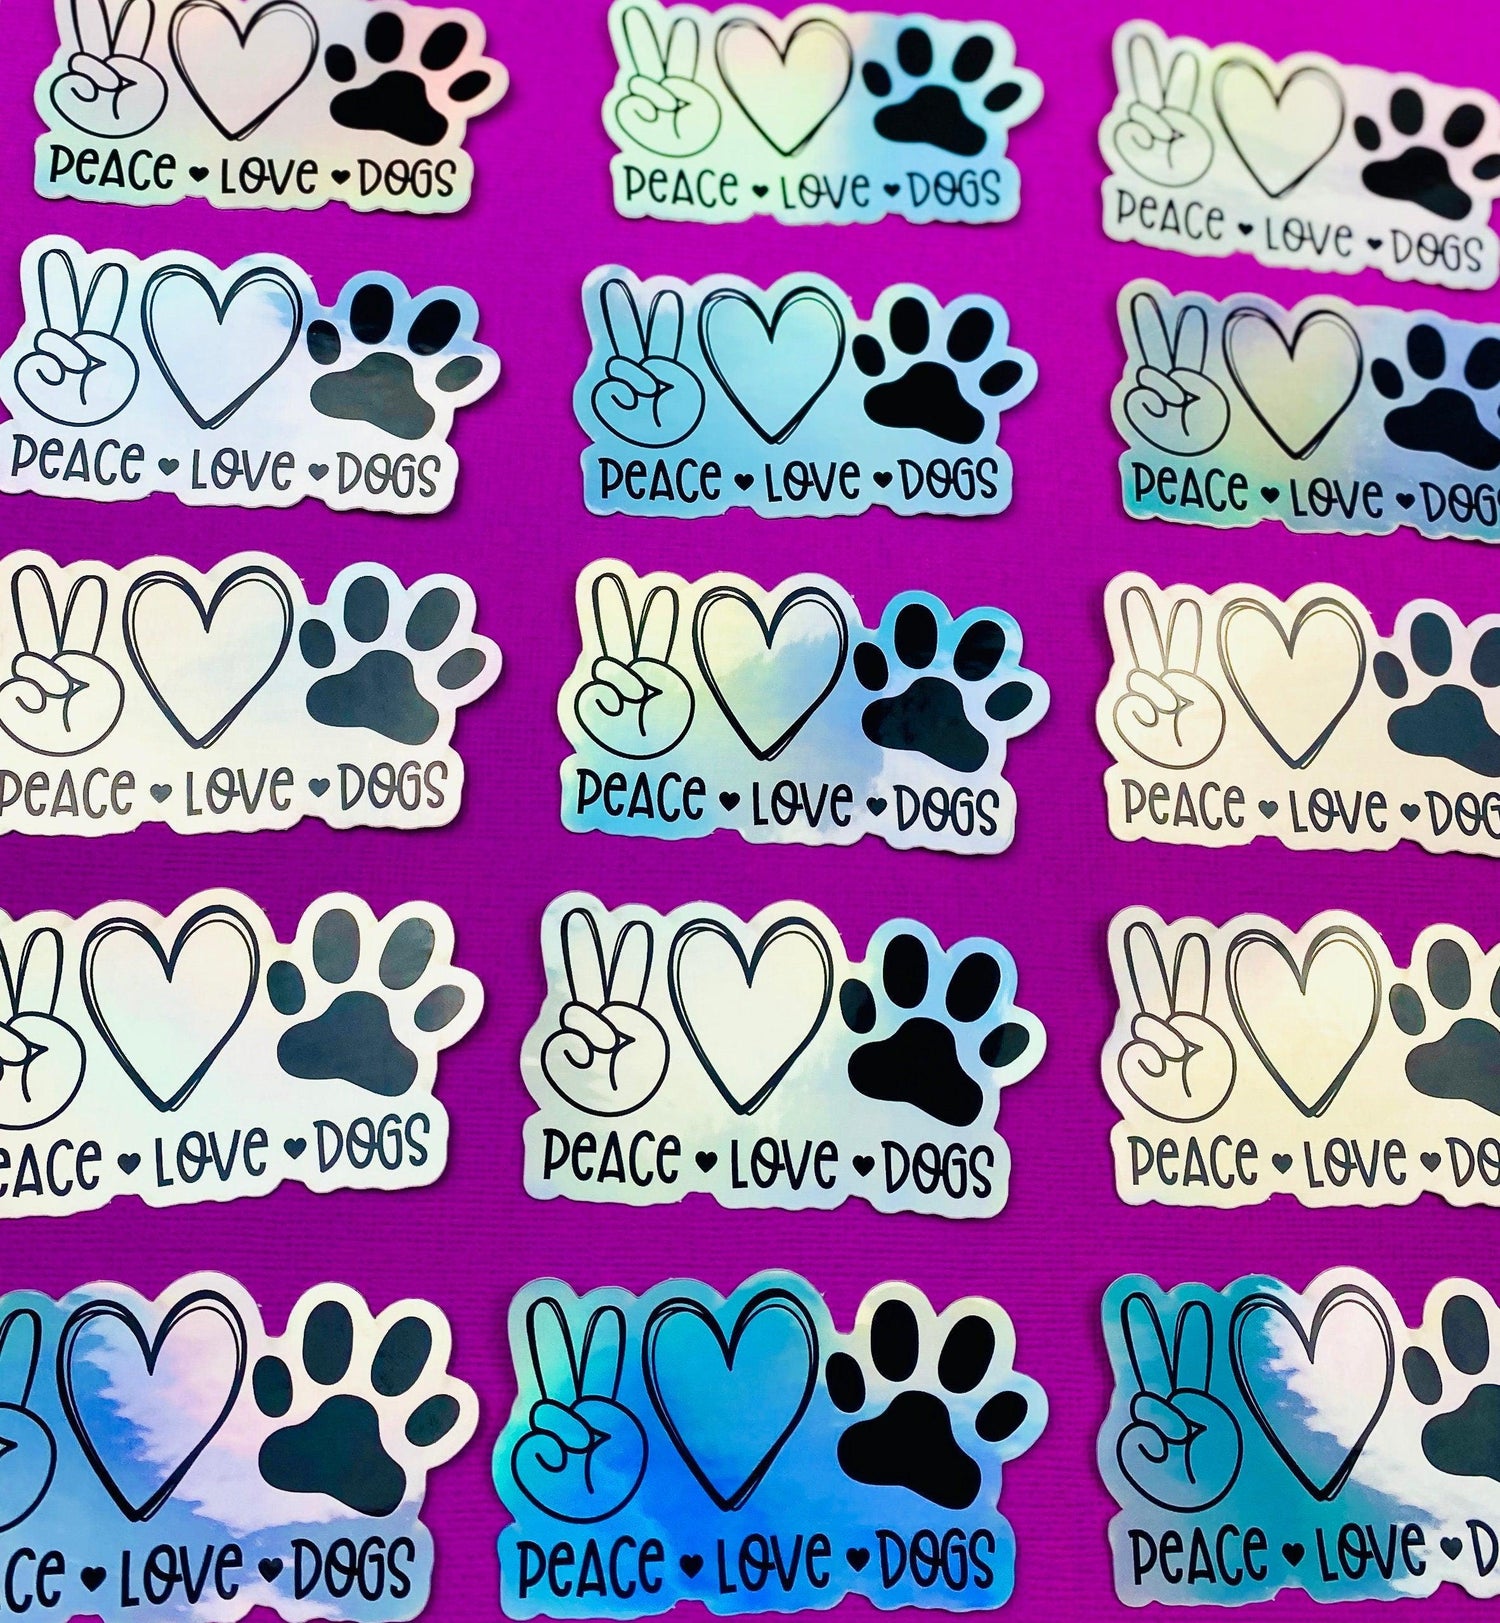 Peace Love Dogs Sticker Hologram Dog Decal for Car, Hydroflask, Pretty Dog Gift for Dog Mom, Dog Car Sticker, Dog Water Bottle Sticker - Ottos Grotto :: Stickers For Your Stuff